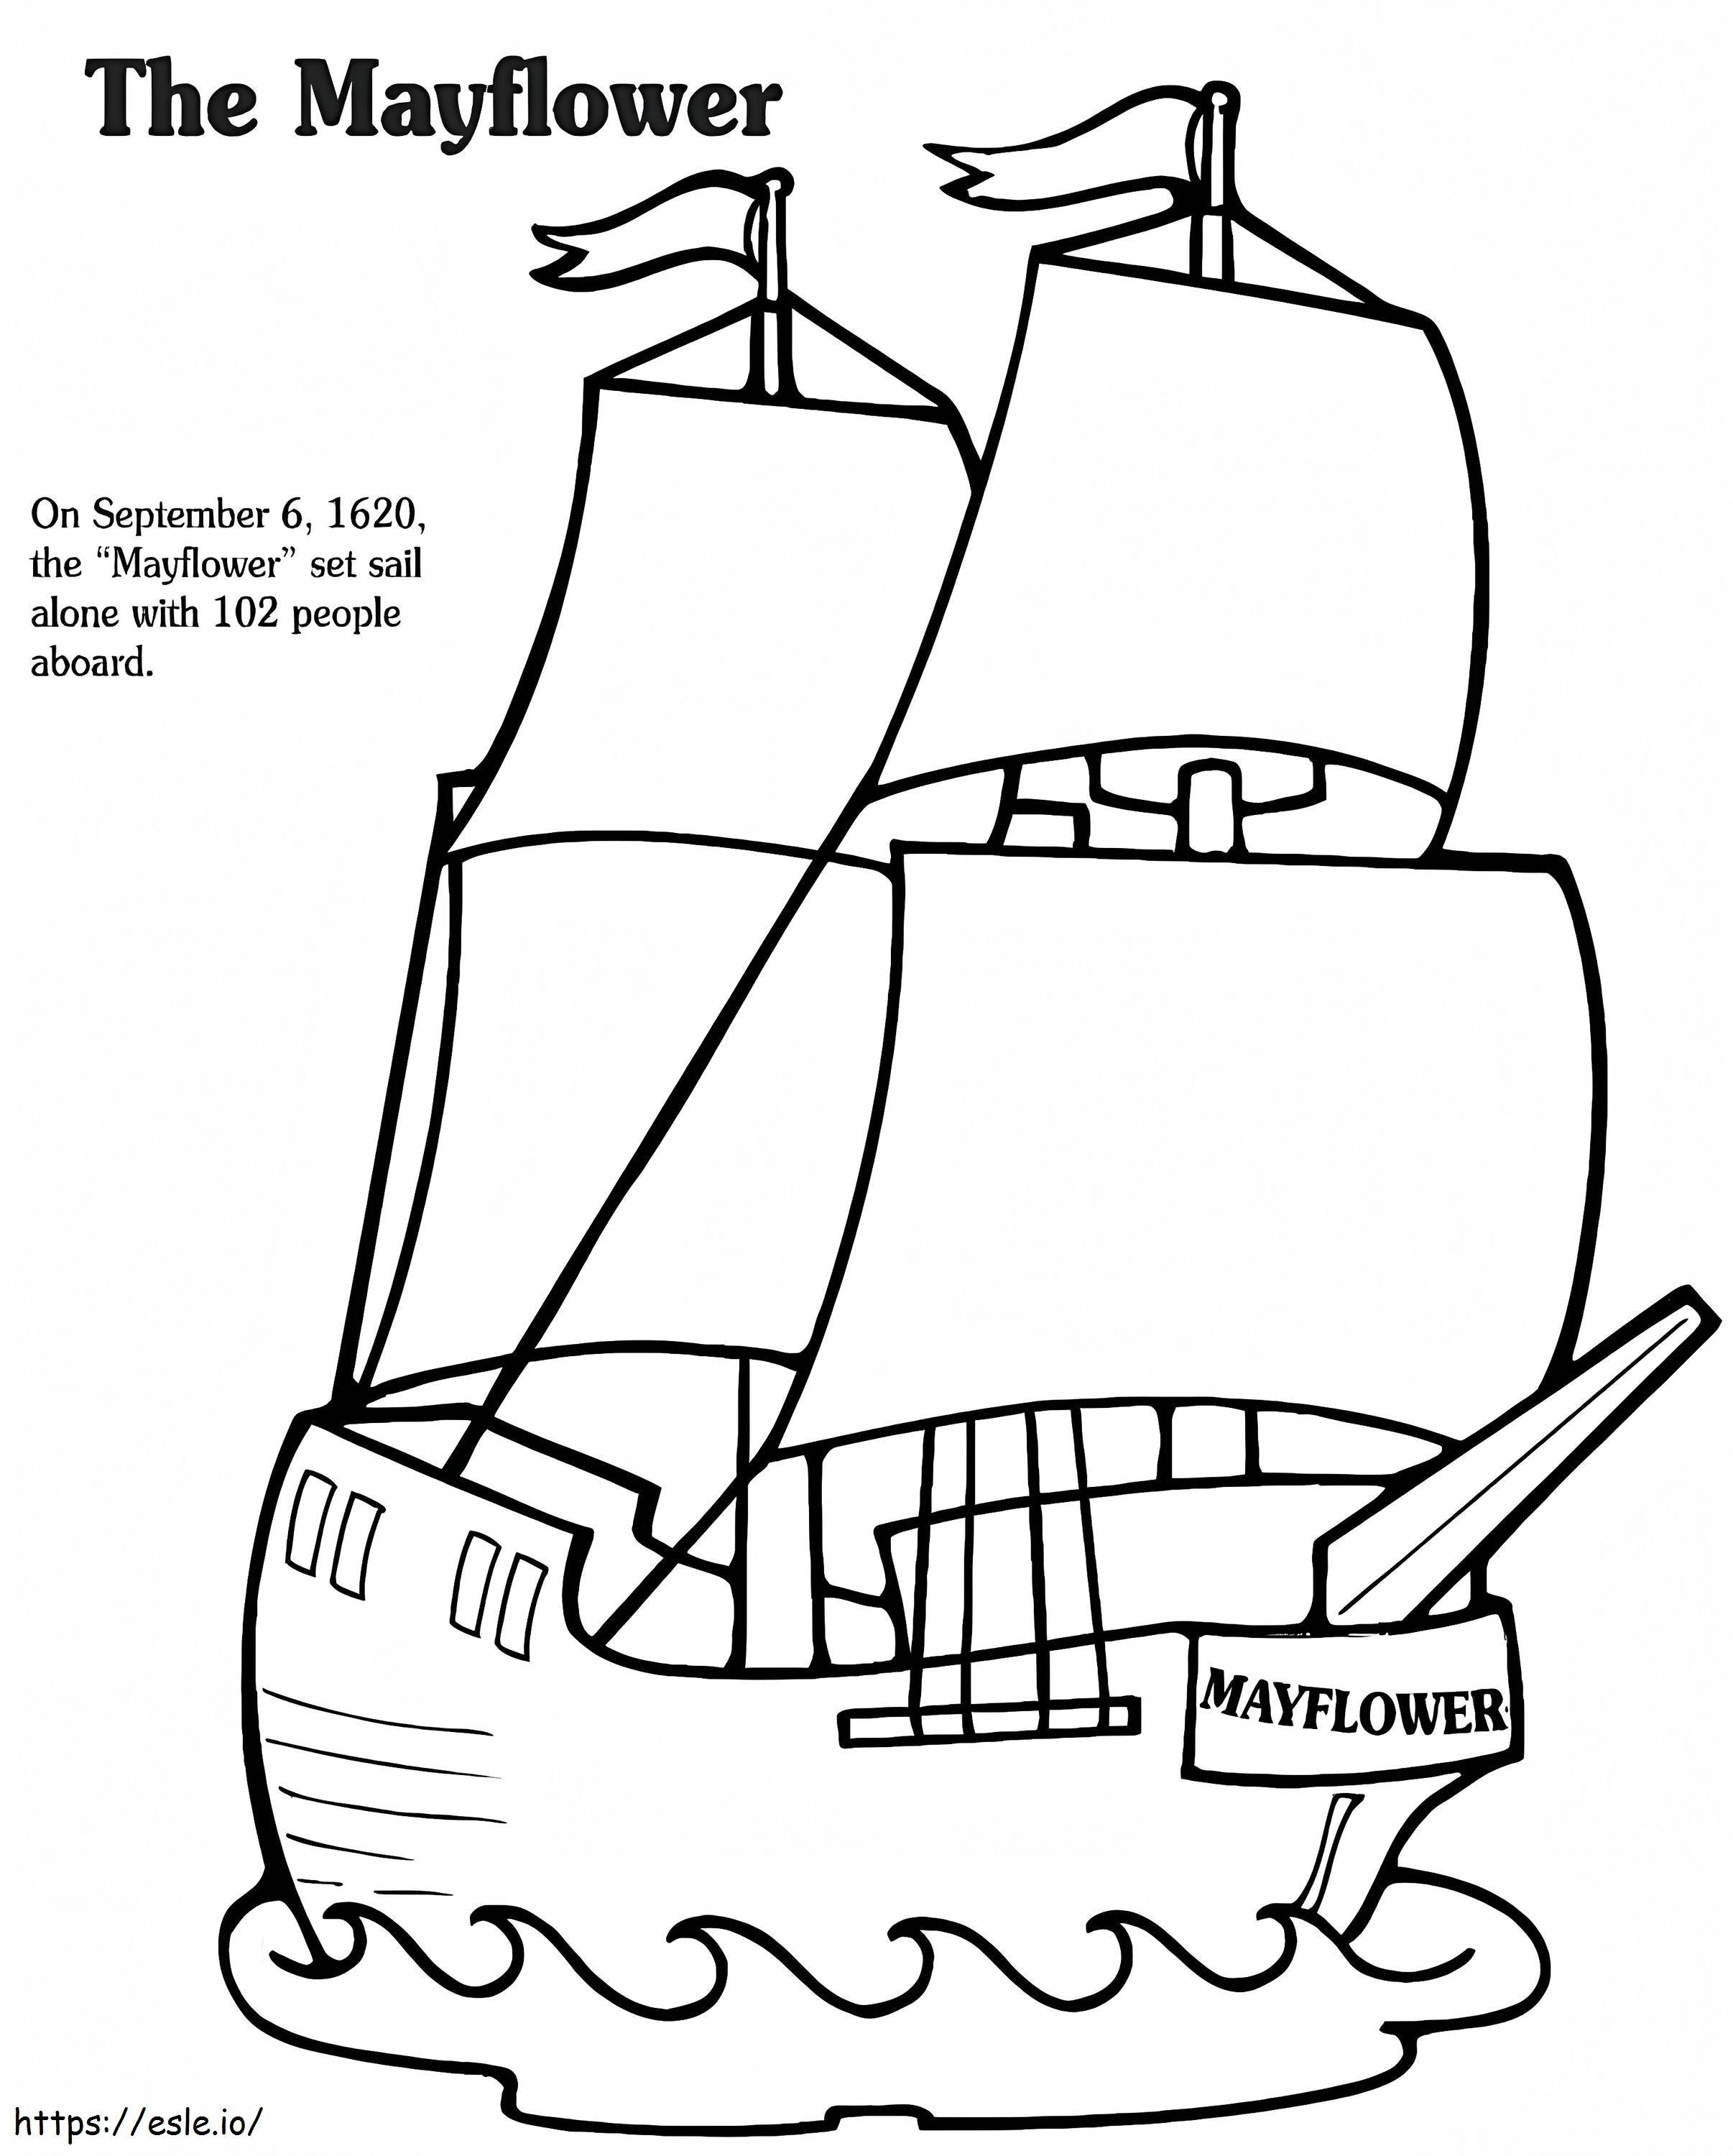 The Mayflower coloring page